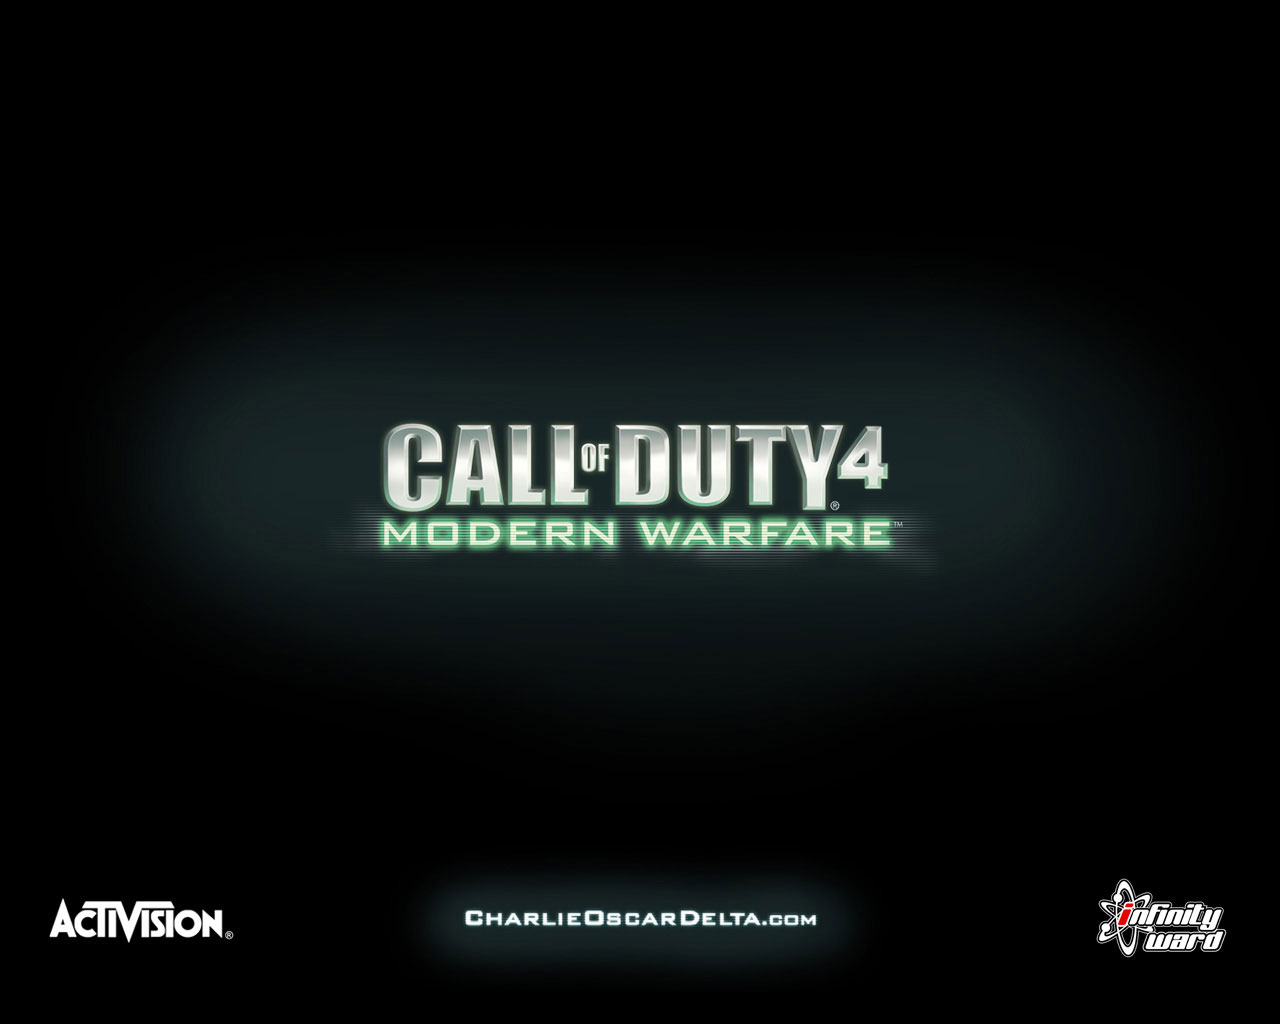 call of duty 4 desktop wallpapers | Call of Duty 4 Wallpapers ...